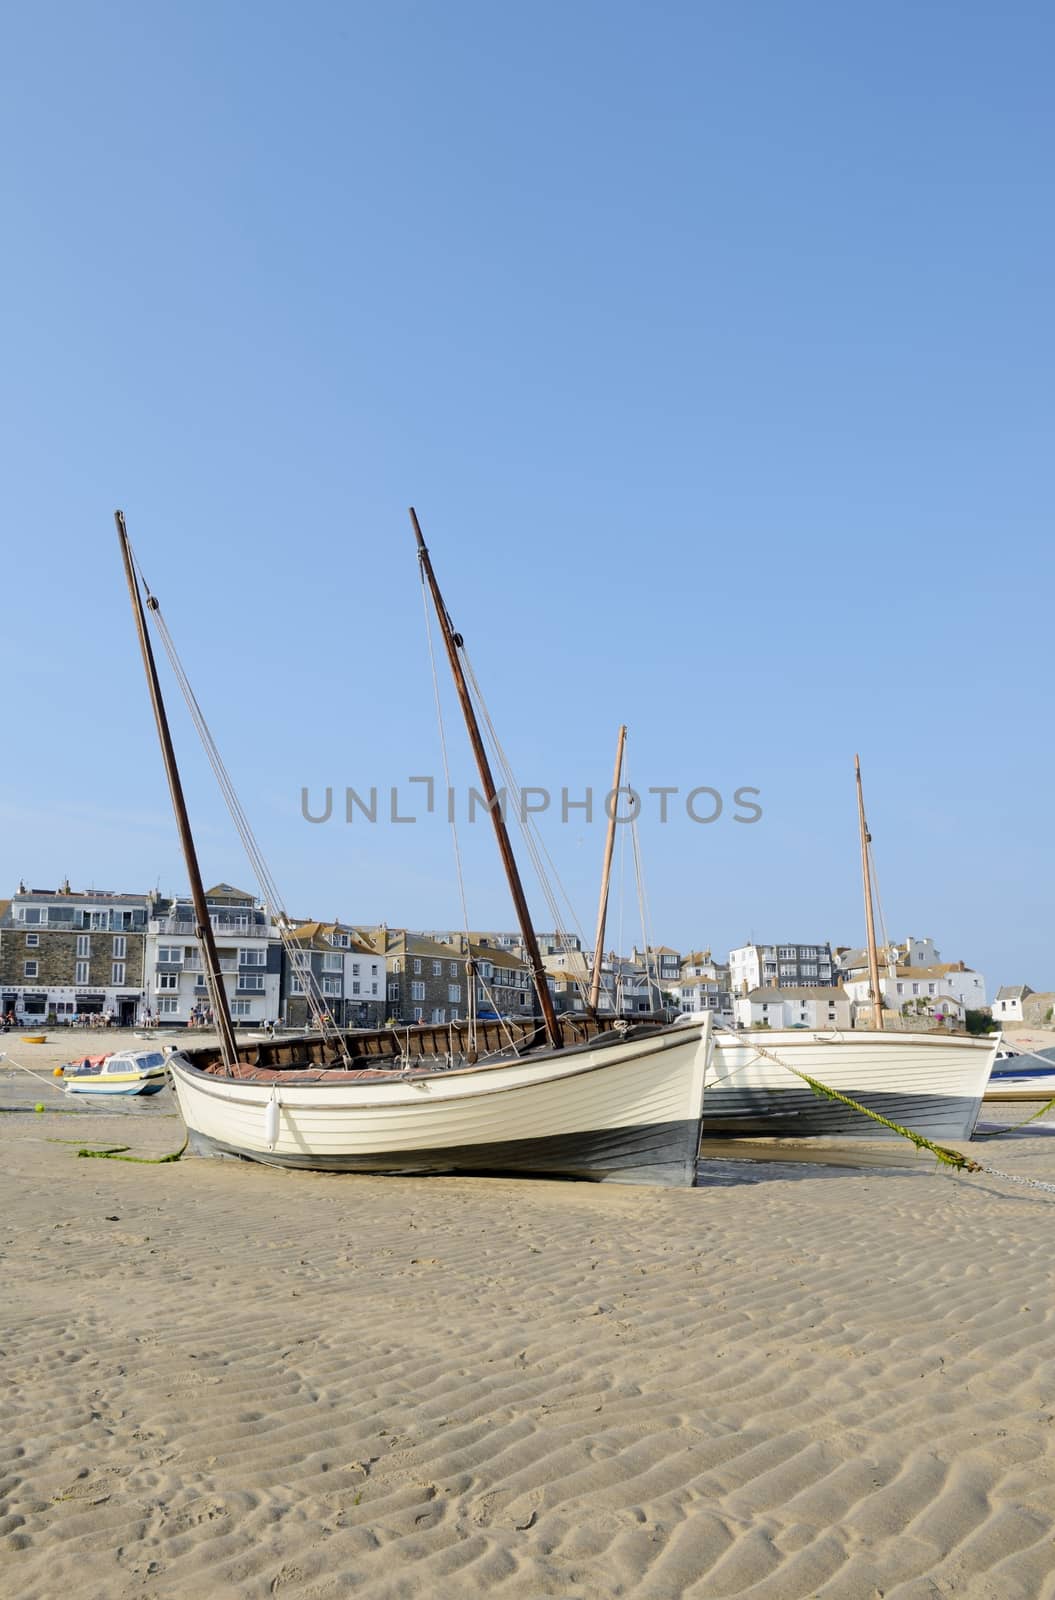 Boats on cornish beach by kmwphotography